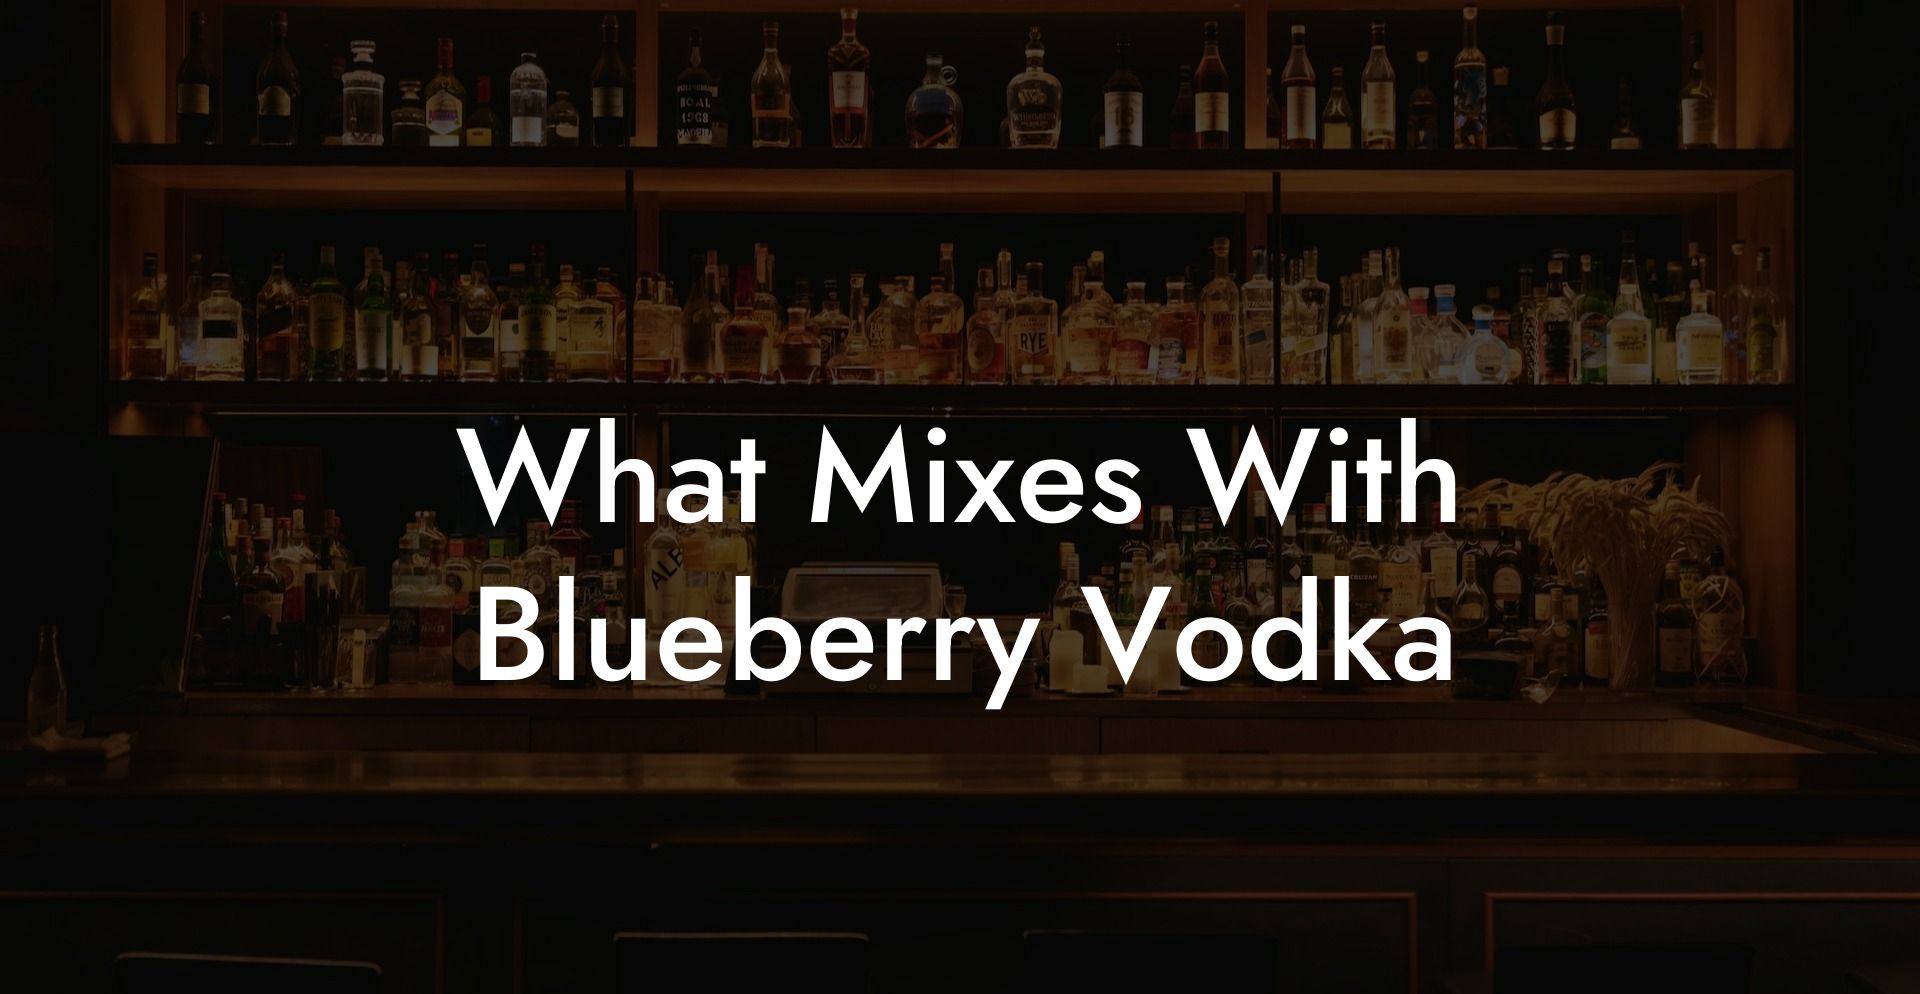 What Mixes With Blueberry Vodka